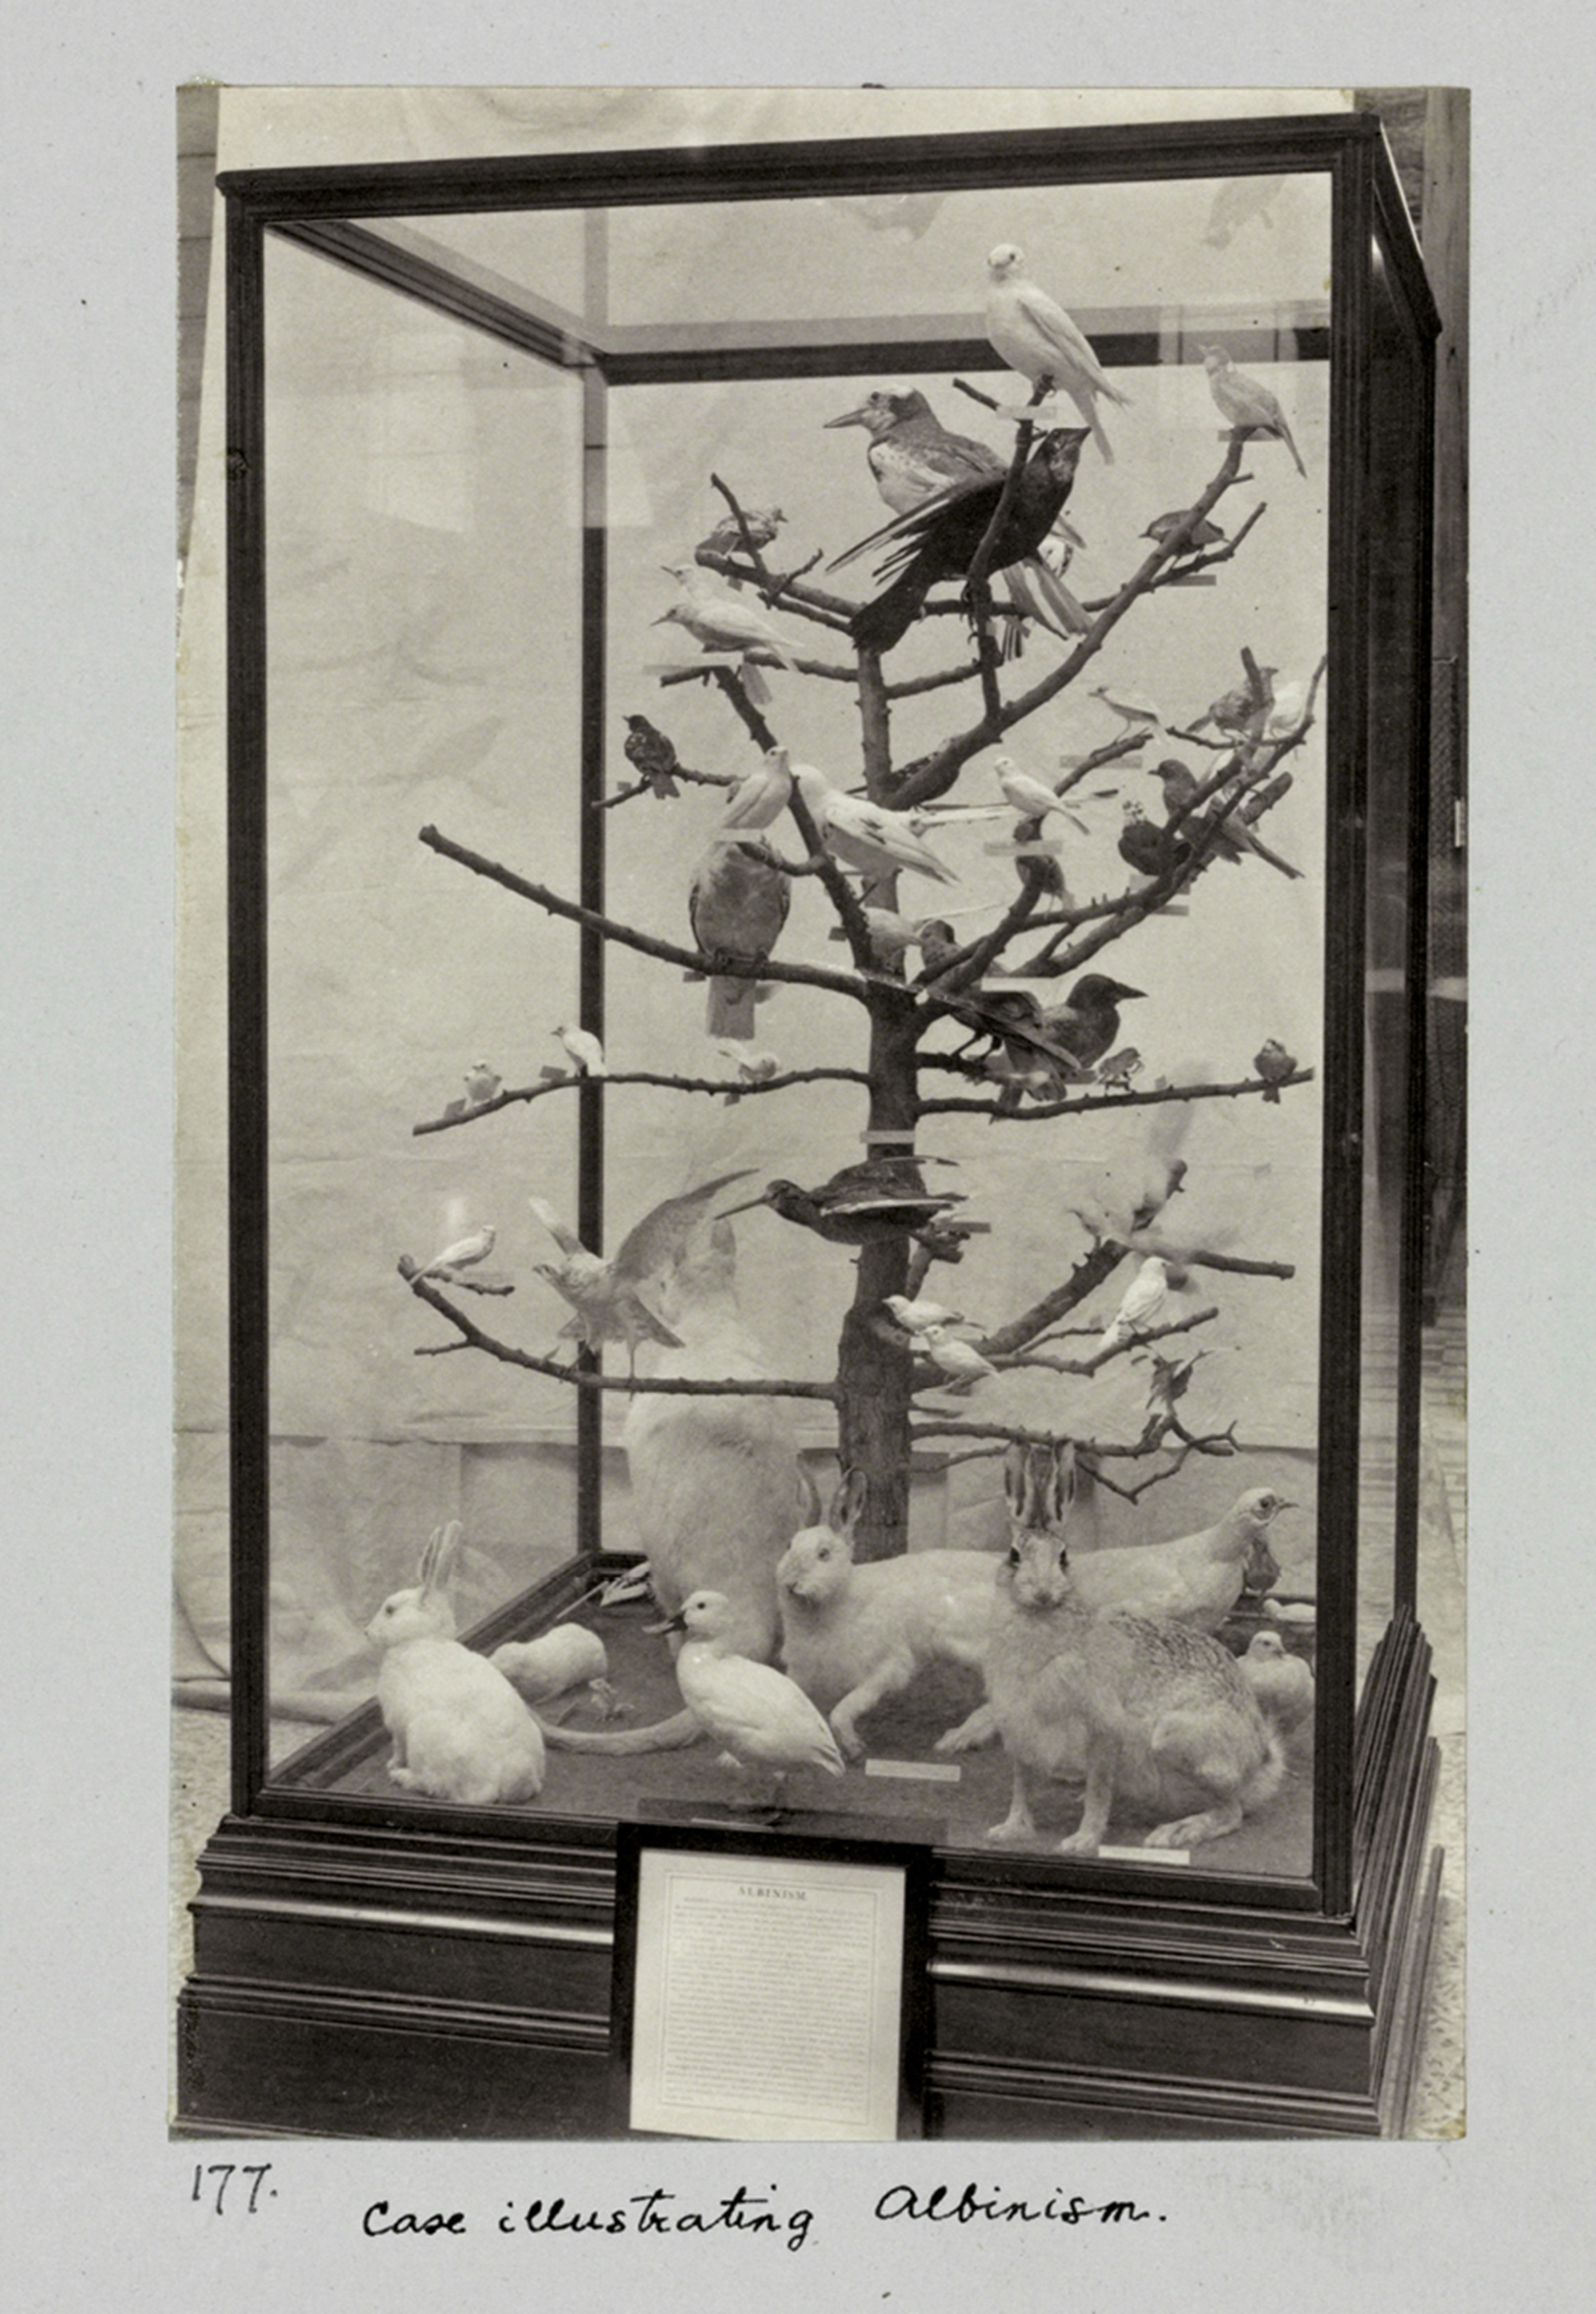 A case created by Henry Flower for London’s Natural History Museum. It features rabbits and doves whose colour demonstrates albinism.